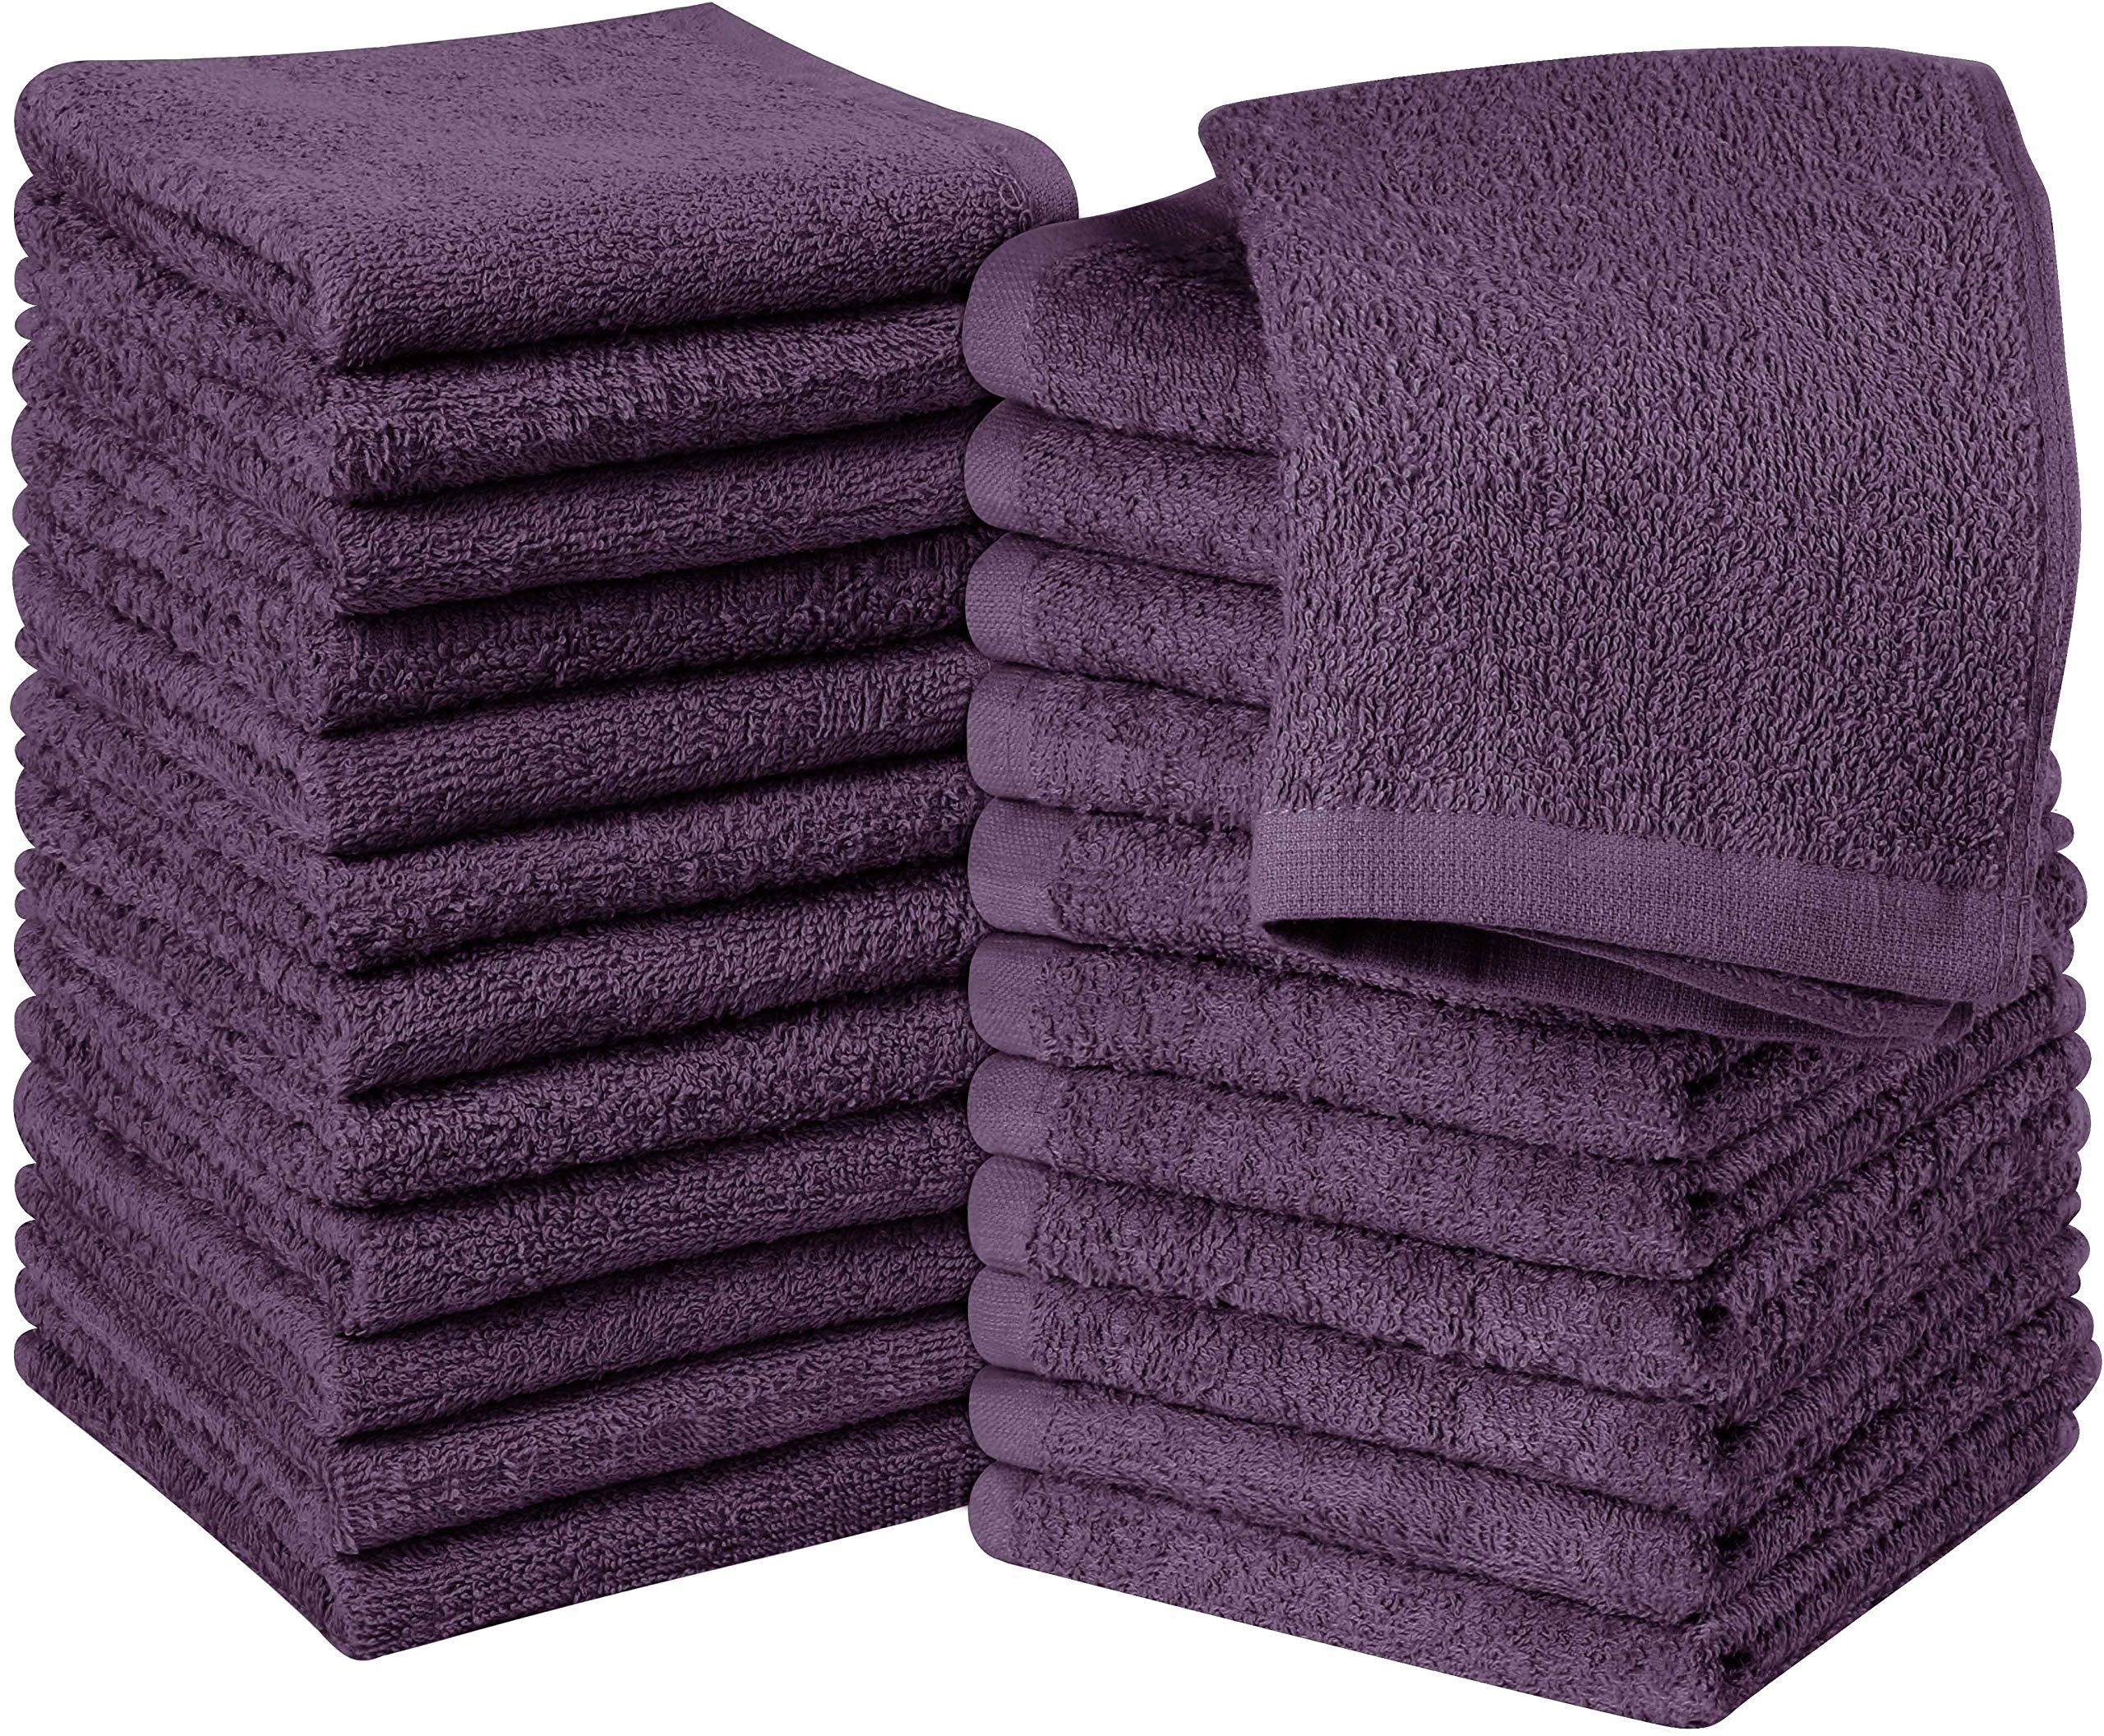 Utopia Towels [12 Pack] Premium Wash Cloths Set (12 x 12 inches) 100% Cotton Ring SPUN, Highly Absorbent and Soft Feel Essential Washcloths for